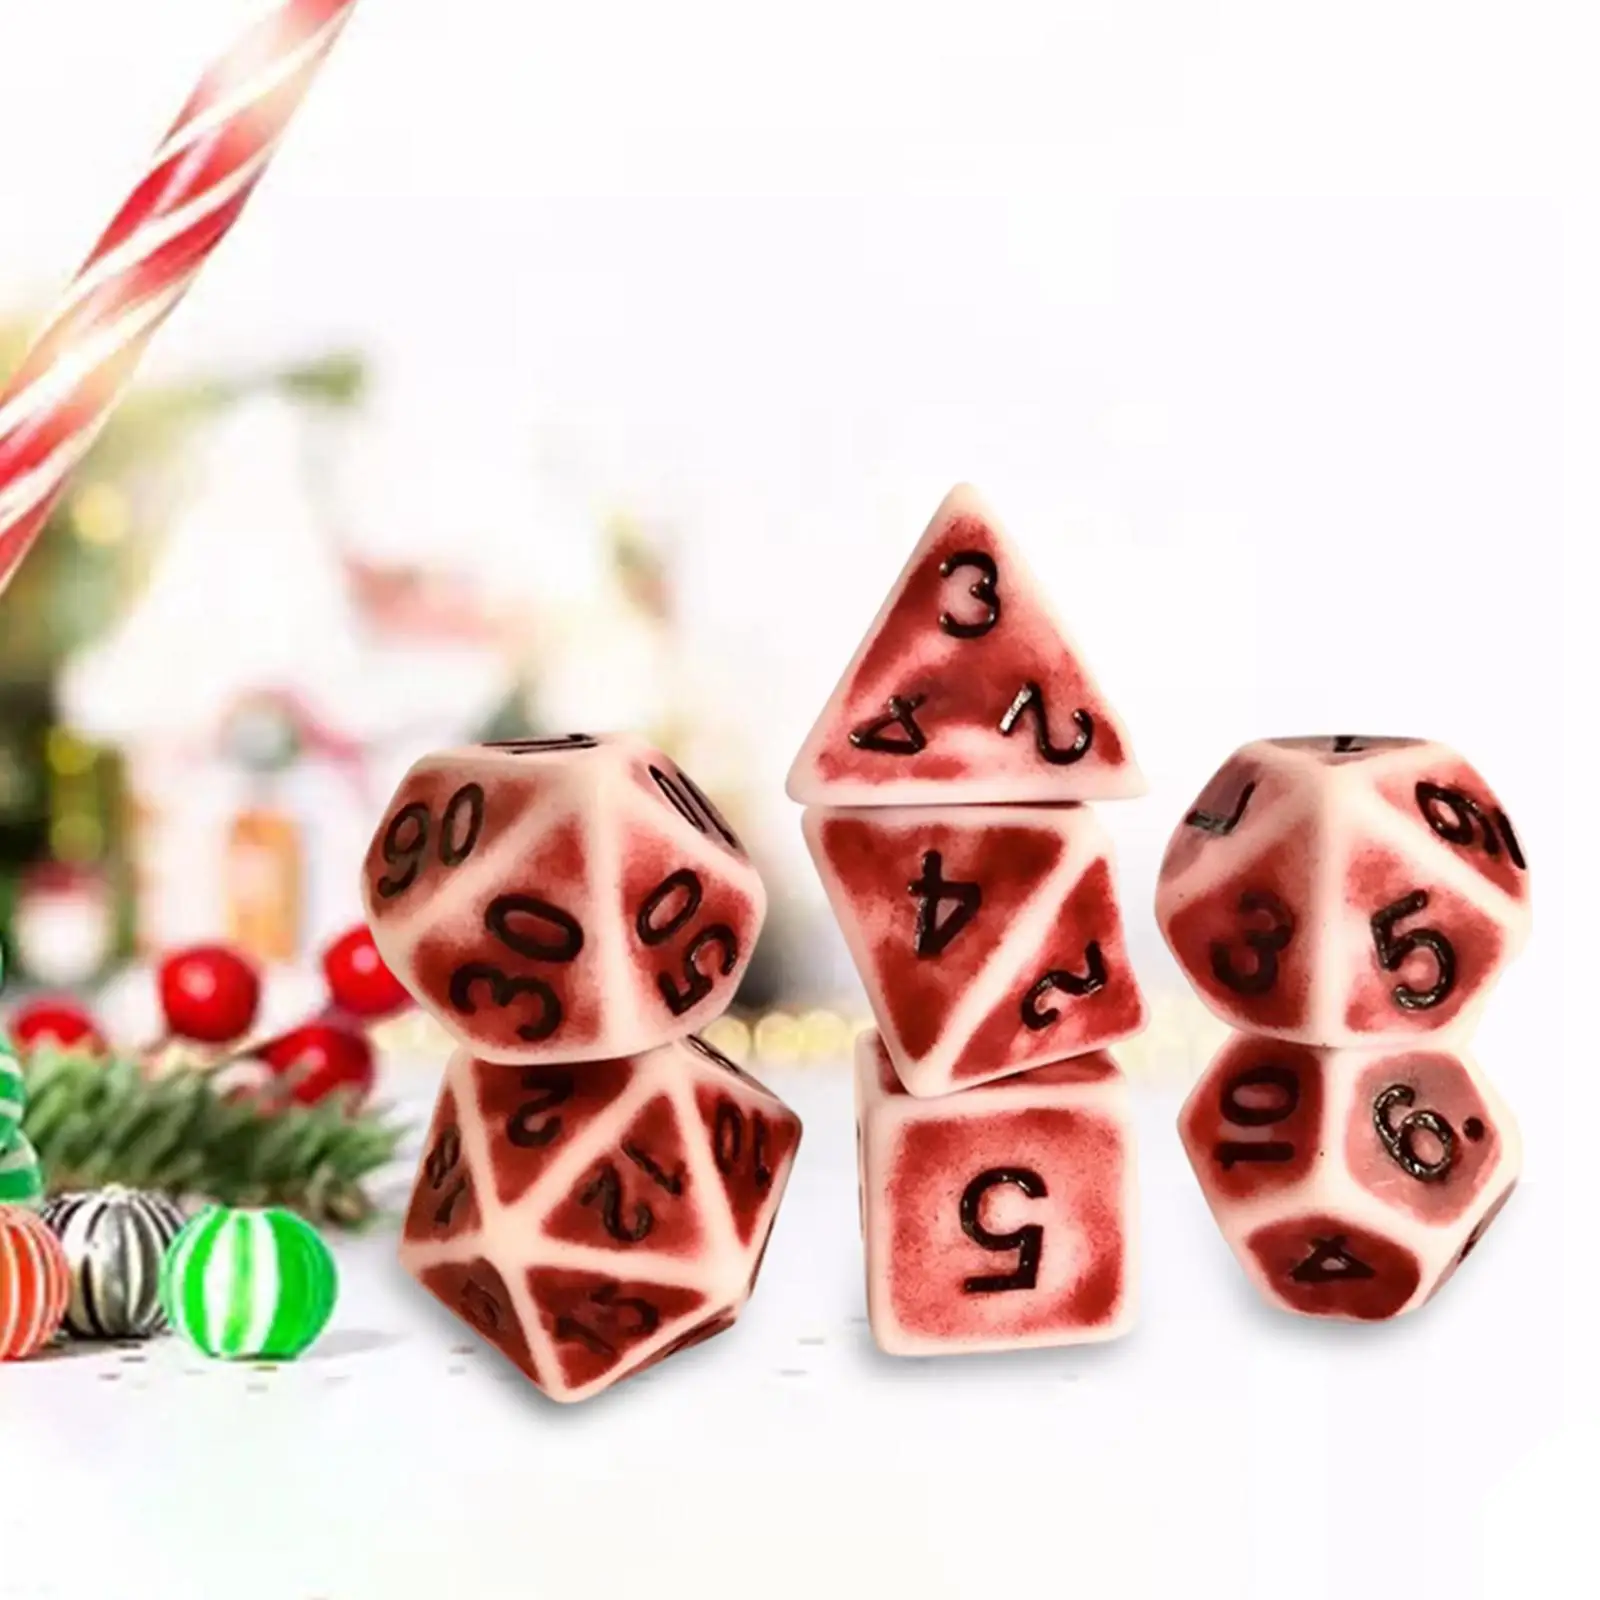 7Pcs 7 Die Polyhedral Dice Multi Sided Dice Party Favor for D&D DND RPG MTG Role Playing Games Table Games